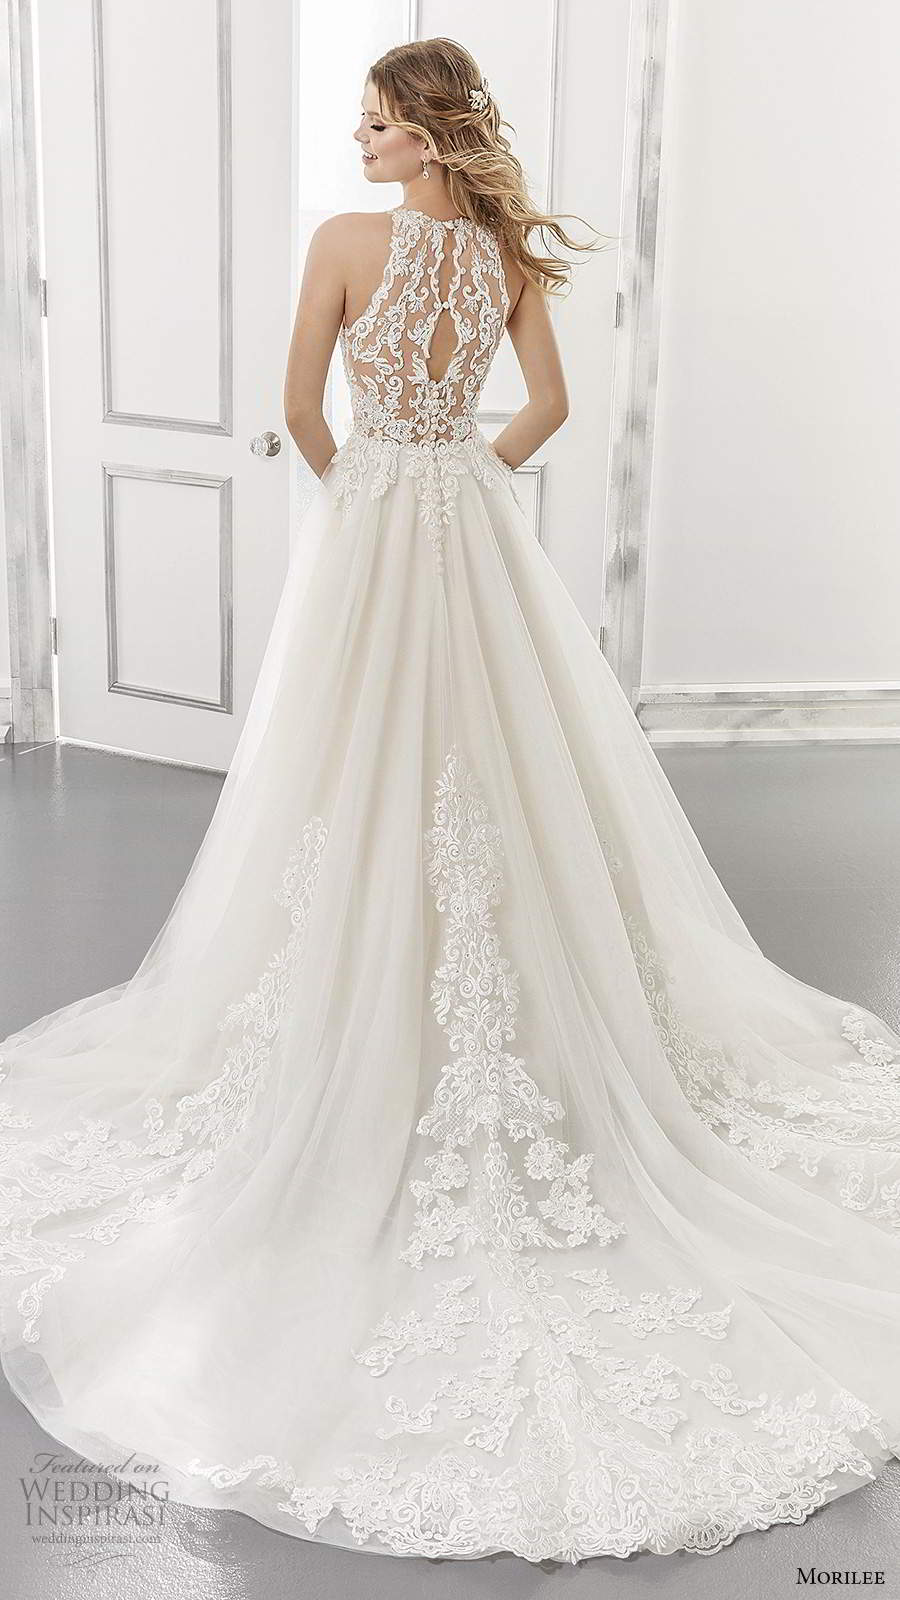 morilee spring 2021 bridal sleeveless illusion halter neckline embellished lace bodice a line ball gown wedding dress chapel train (14) bv